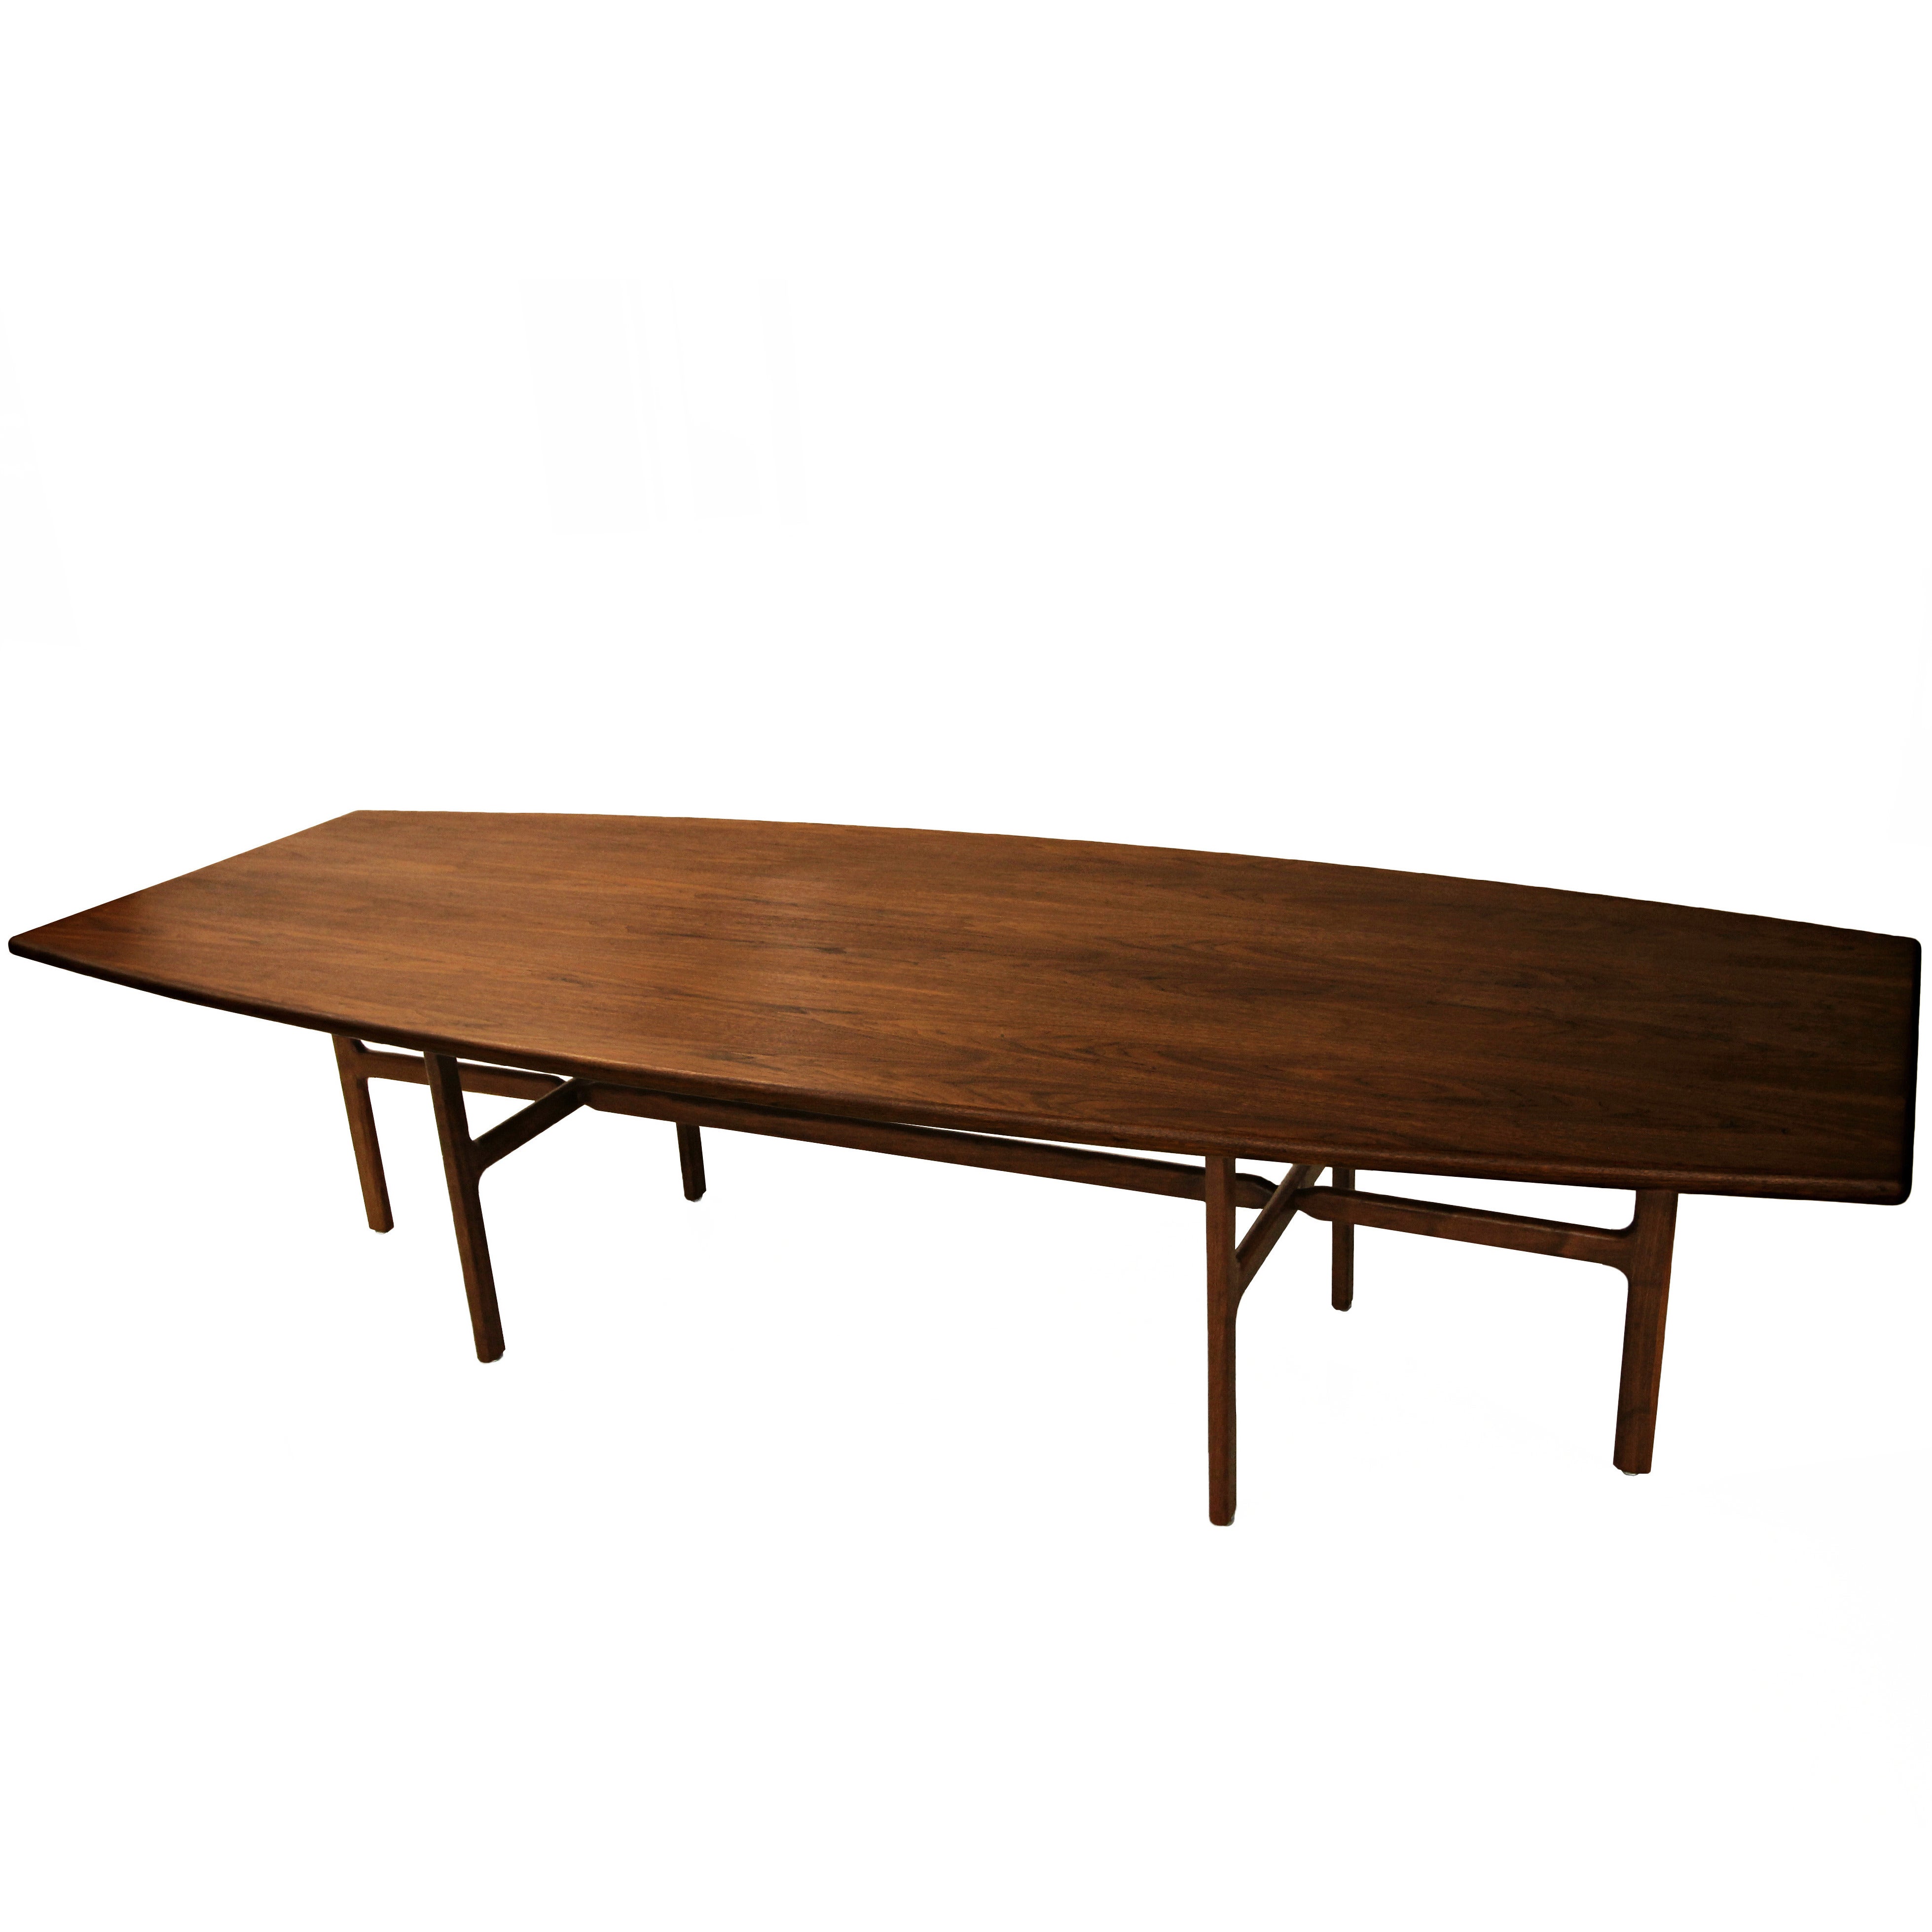 Huge Walnut Surfboard Dining Conference Table Attributed to Jens Risom